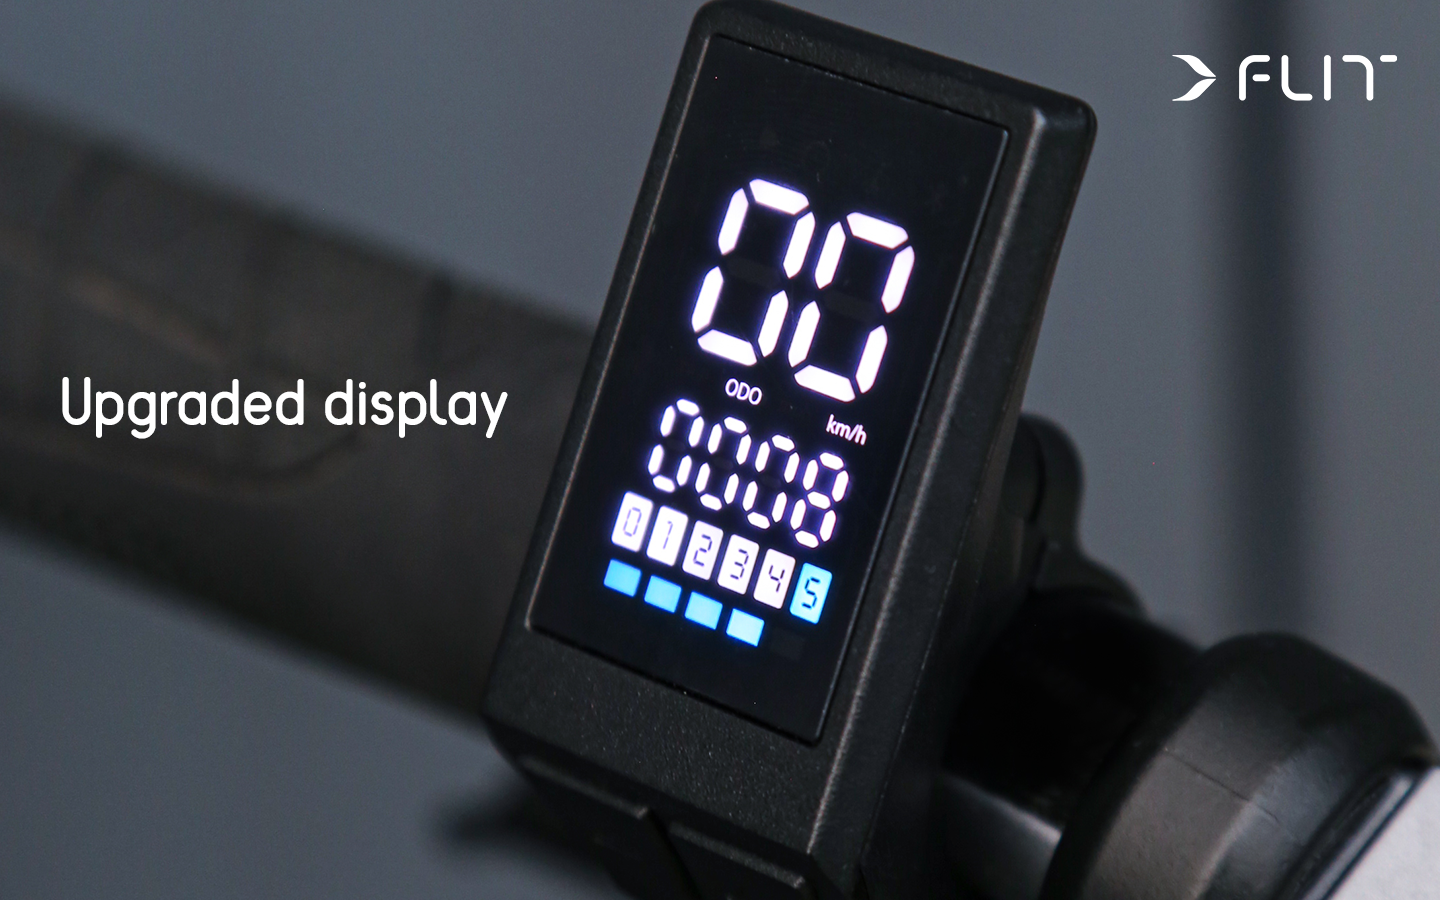 Clearer, simpler display lets you adjust assistance level at the touch of a button